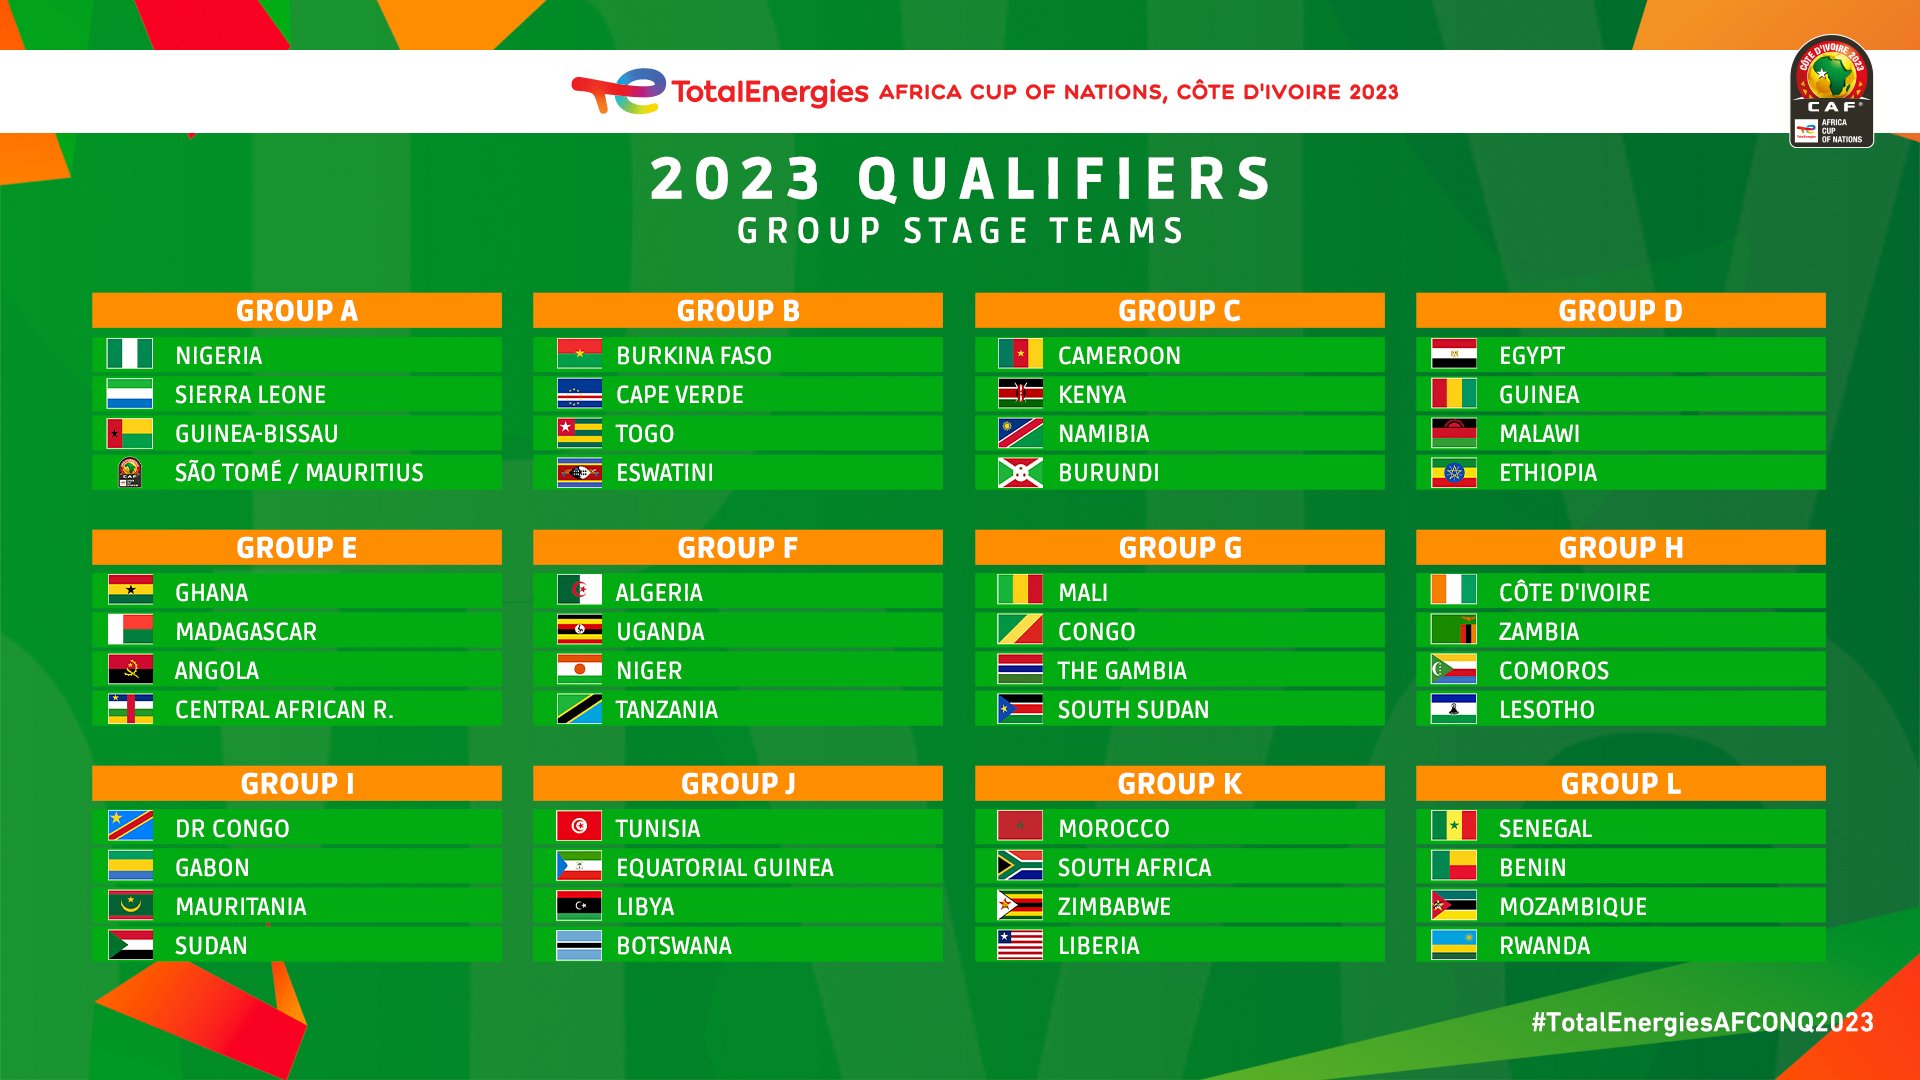 Theresa Soto Viral: Afcon 2023 Matches Results